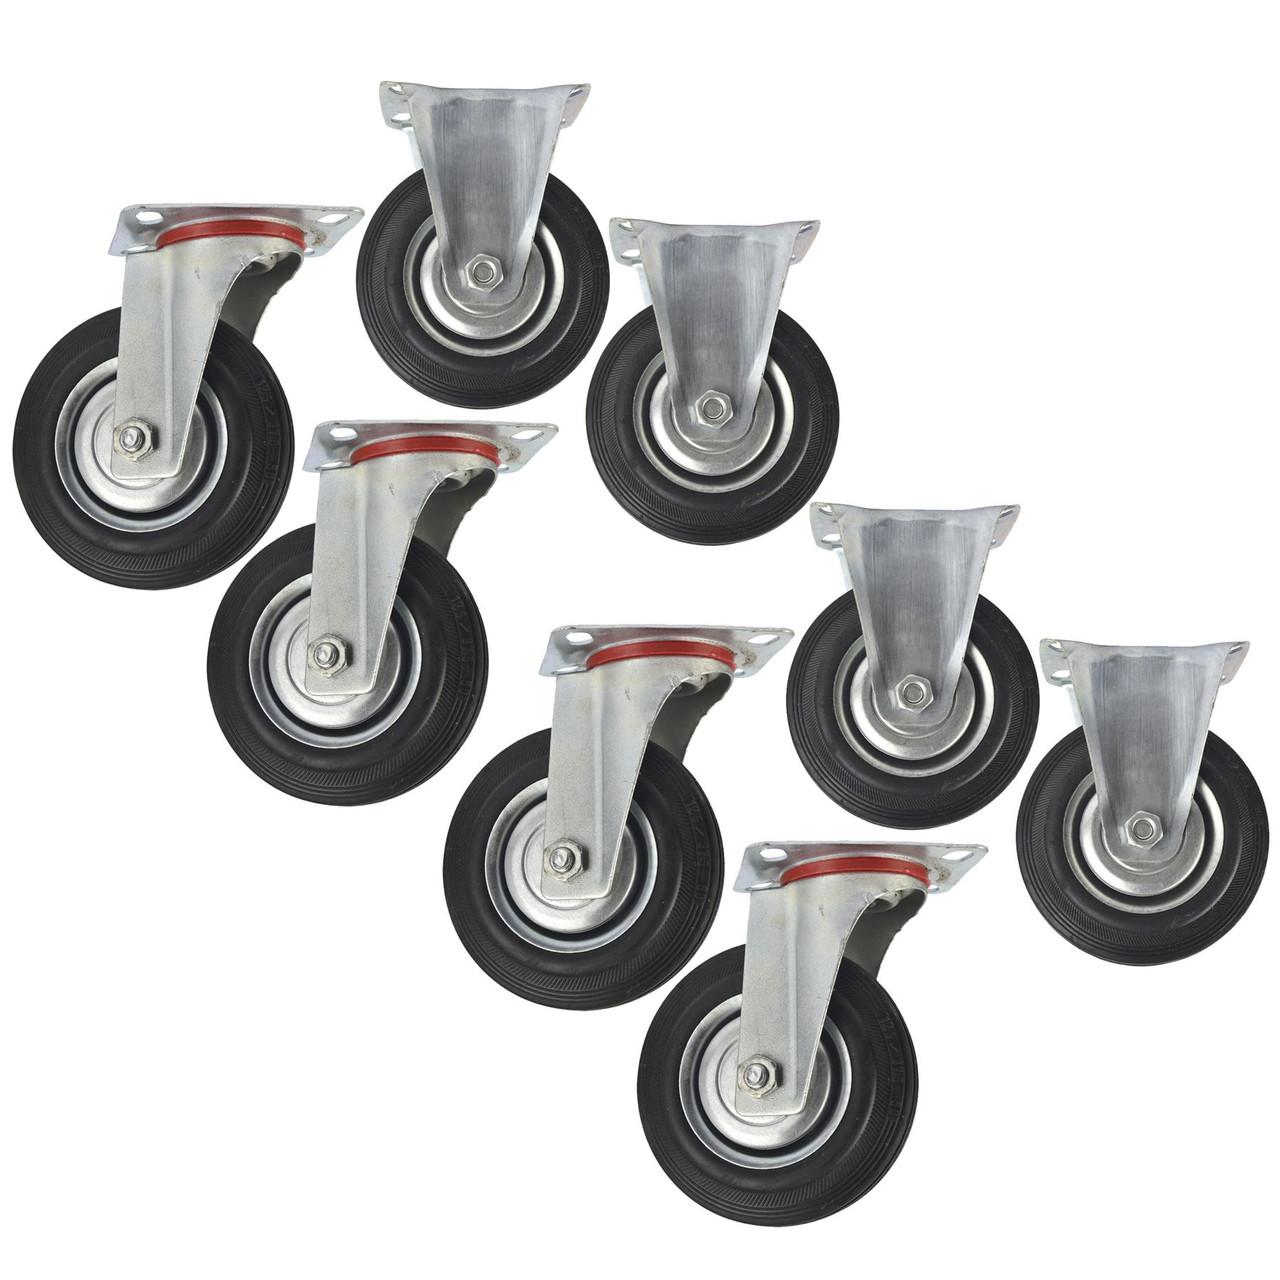 4 Pack CST06_08 5" Rubber Fixed and Swivel With Brake Castor Wheels 125mm 